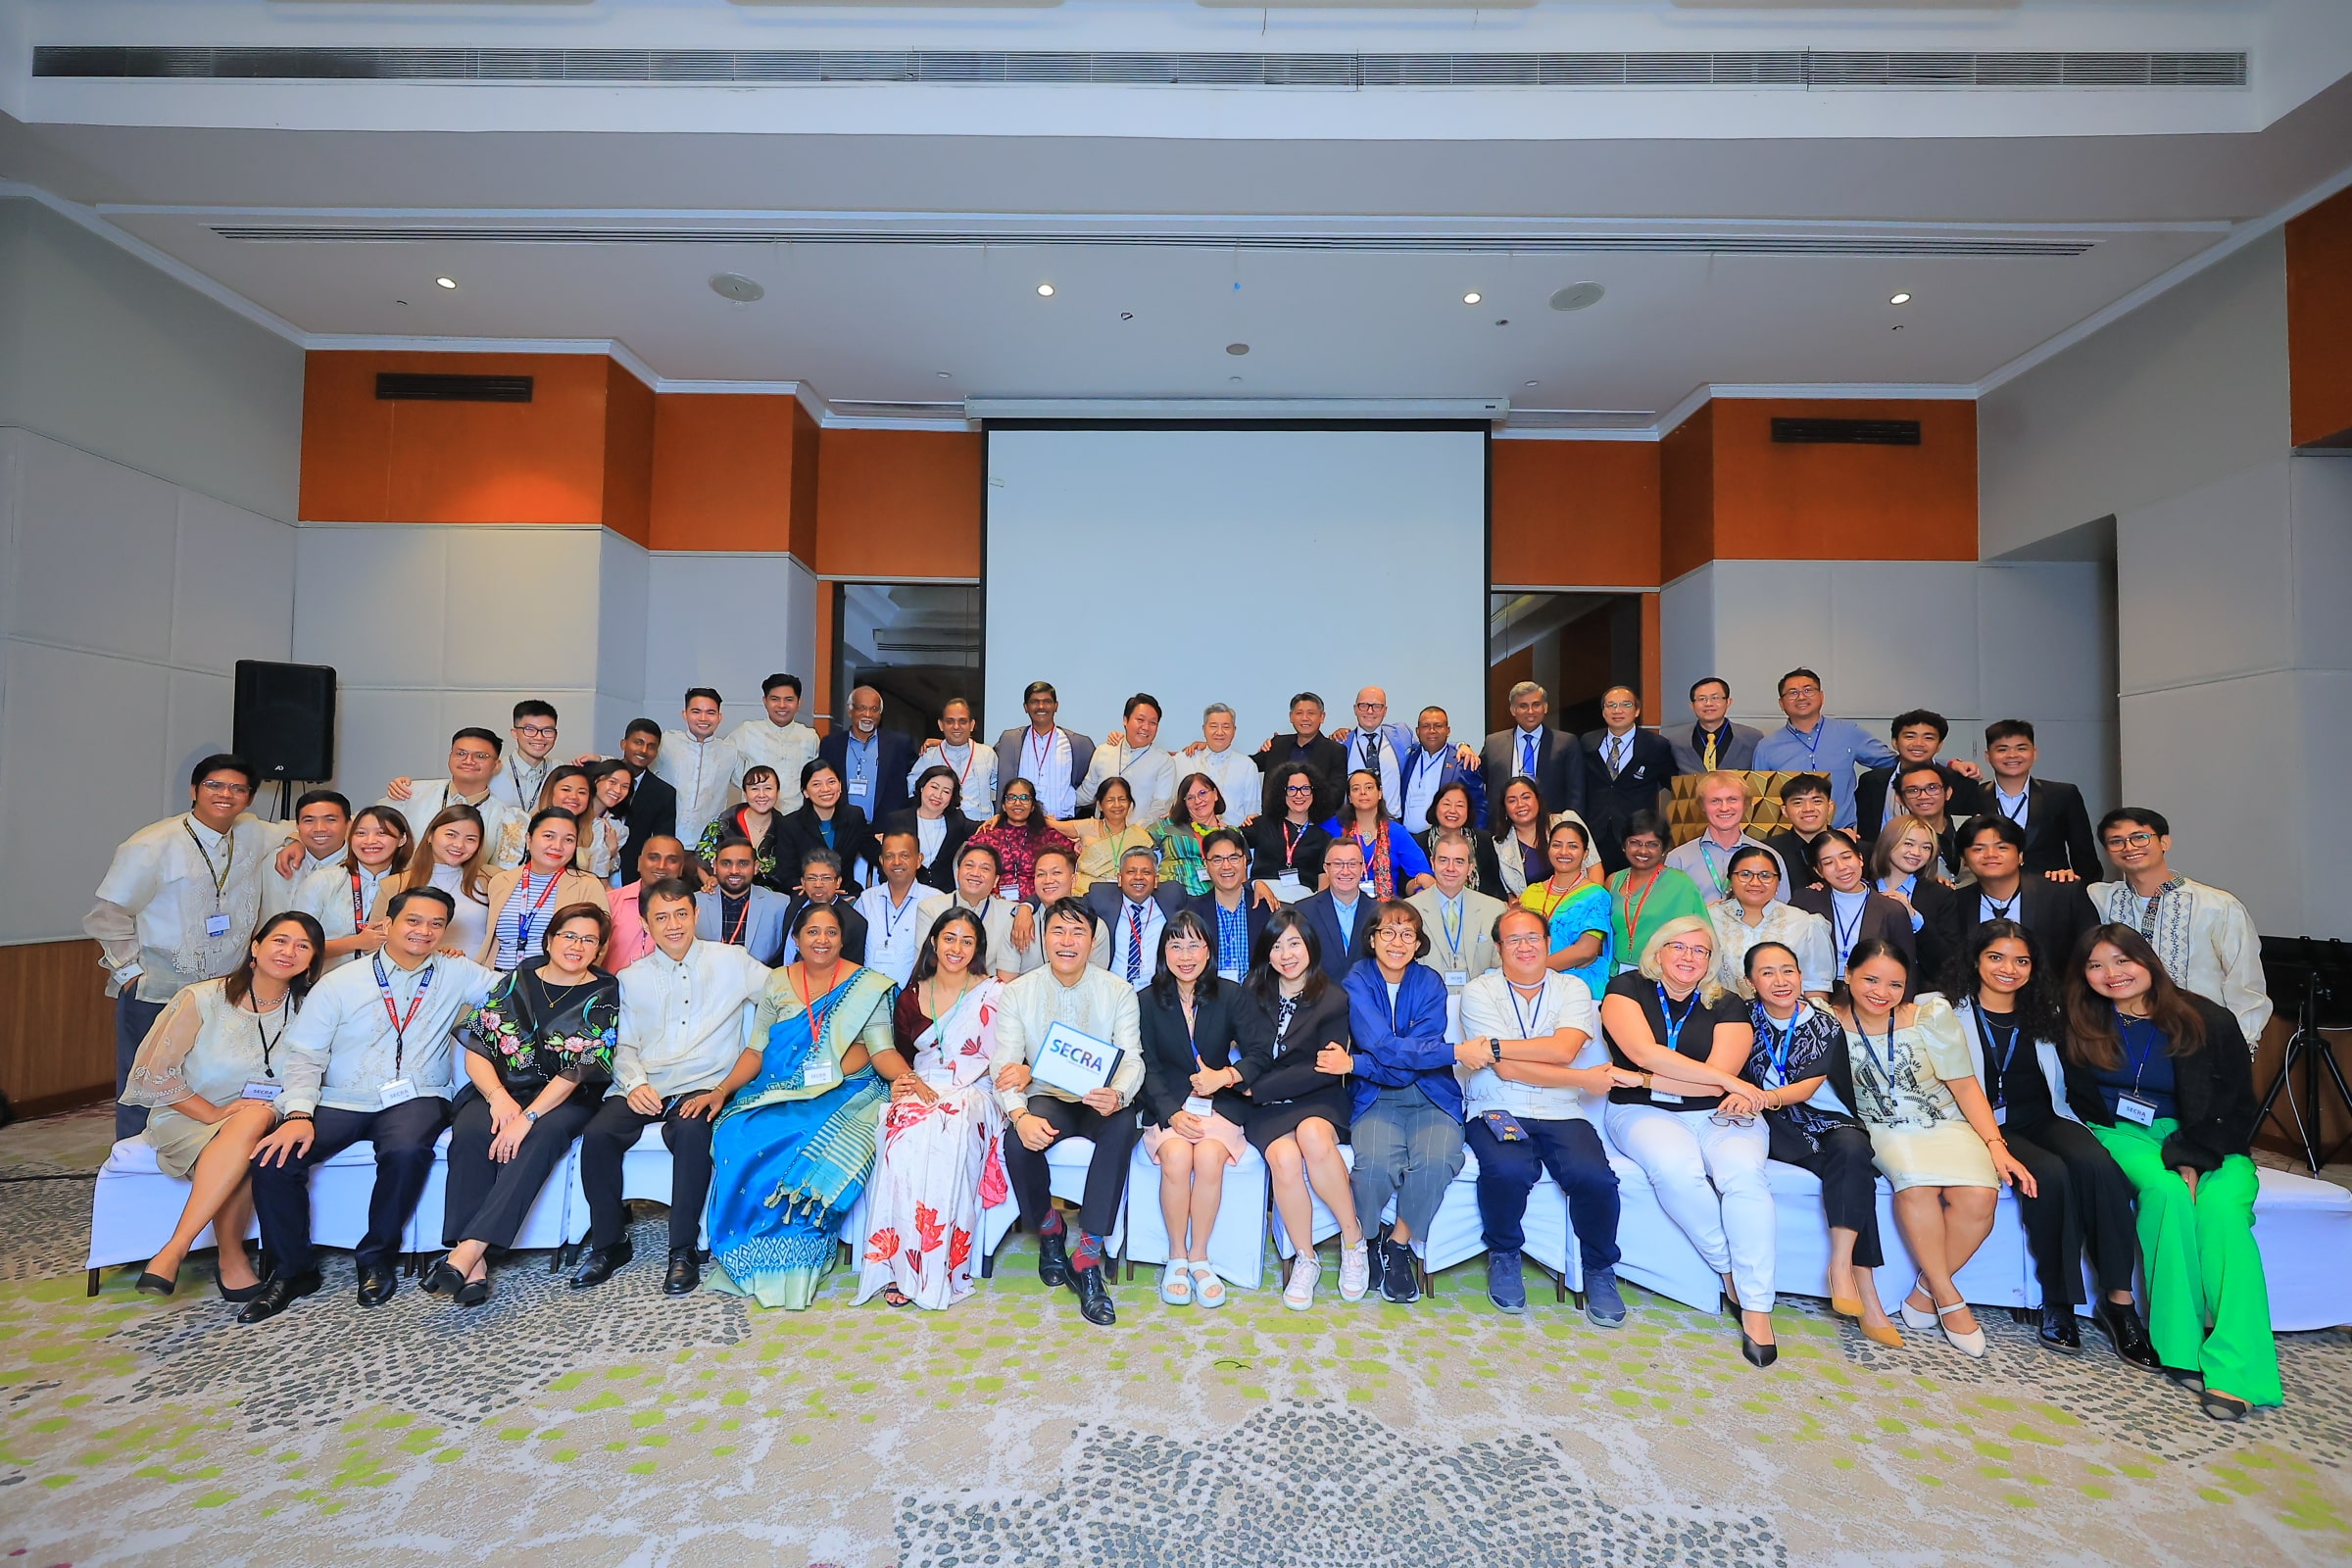 A group photo taken on the first day of the SECRA Metro Manila Meeting